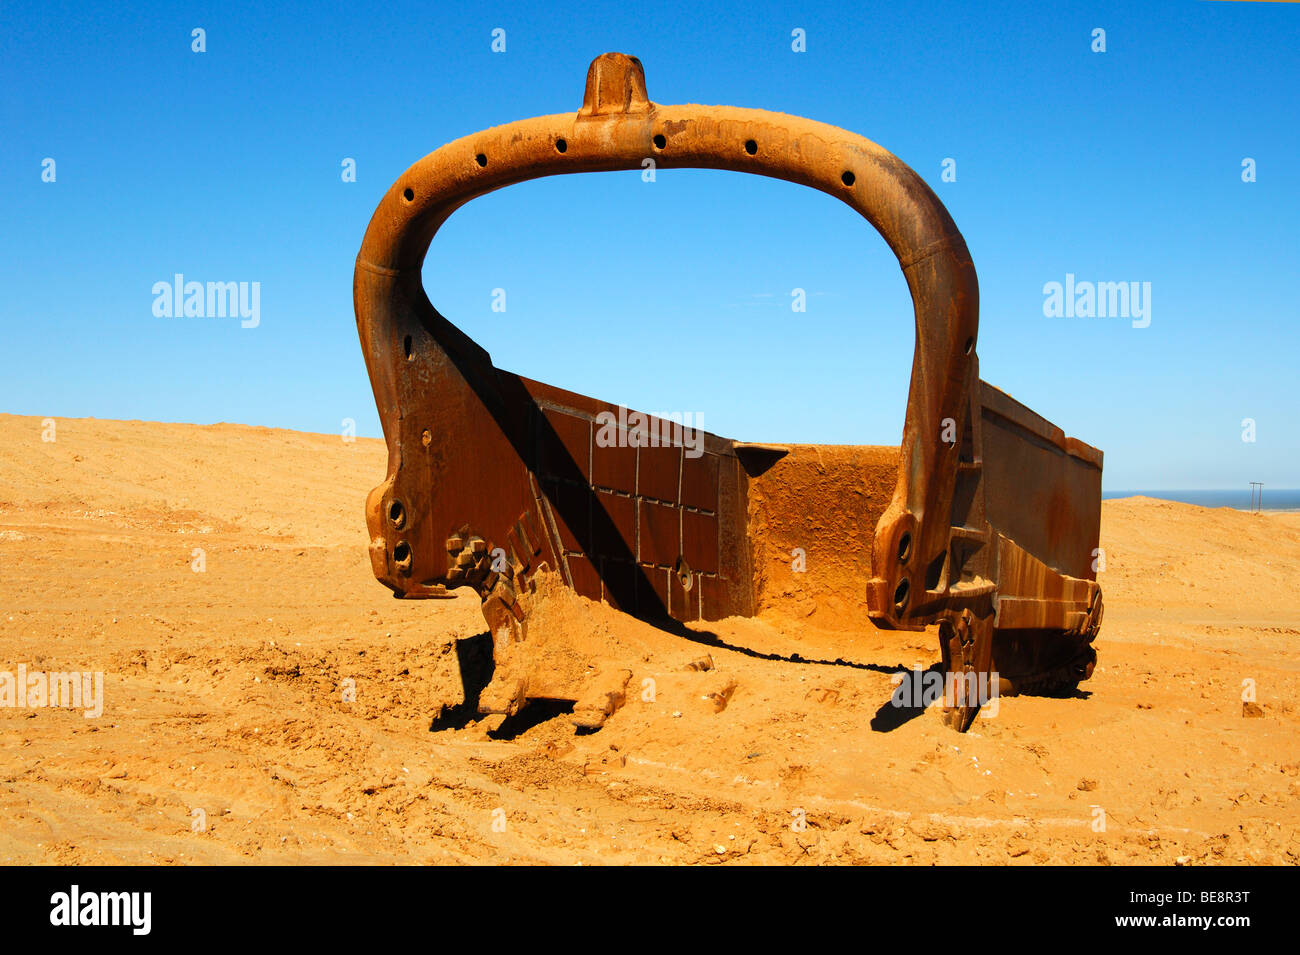 Large bucket of a dragline, De Beers Namaqualand diamond mine, Kleinzee, Northern Cape, South Africa Stock Photo